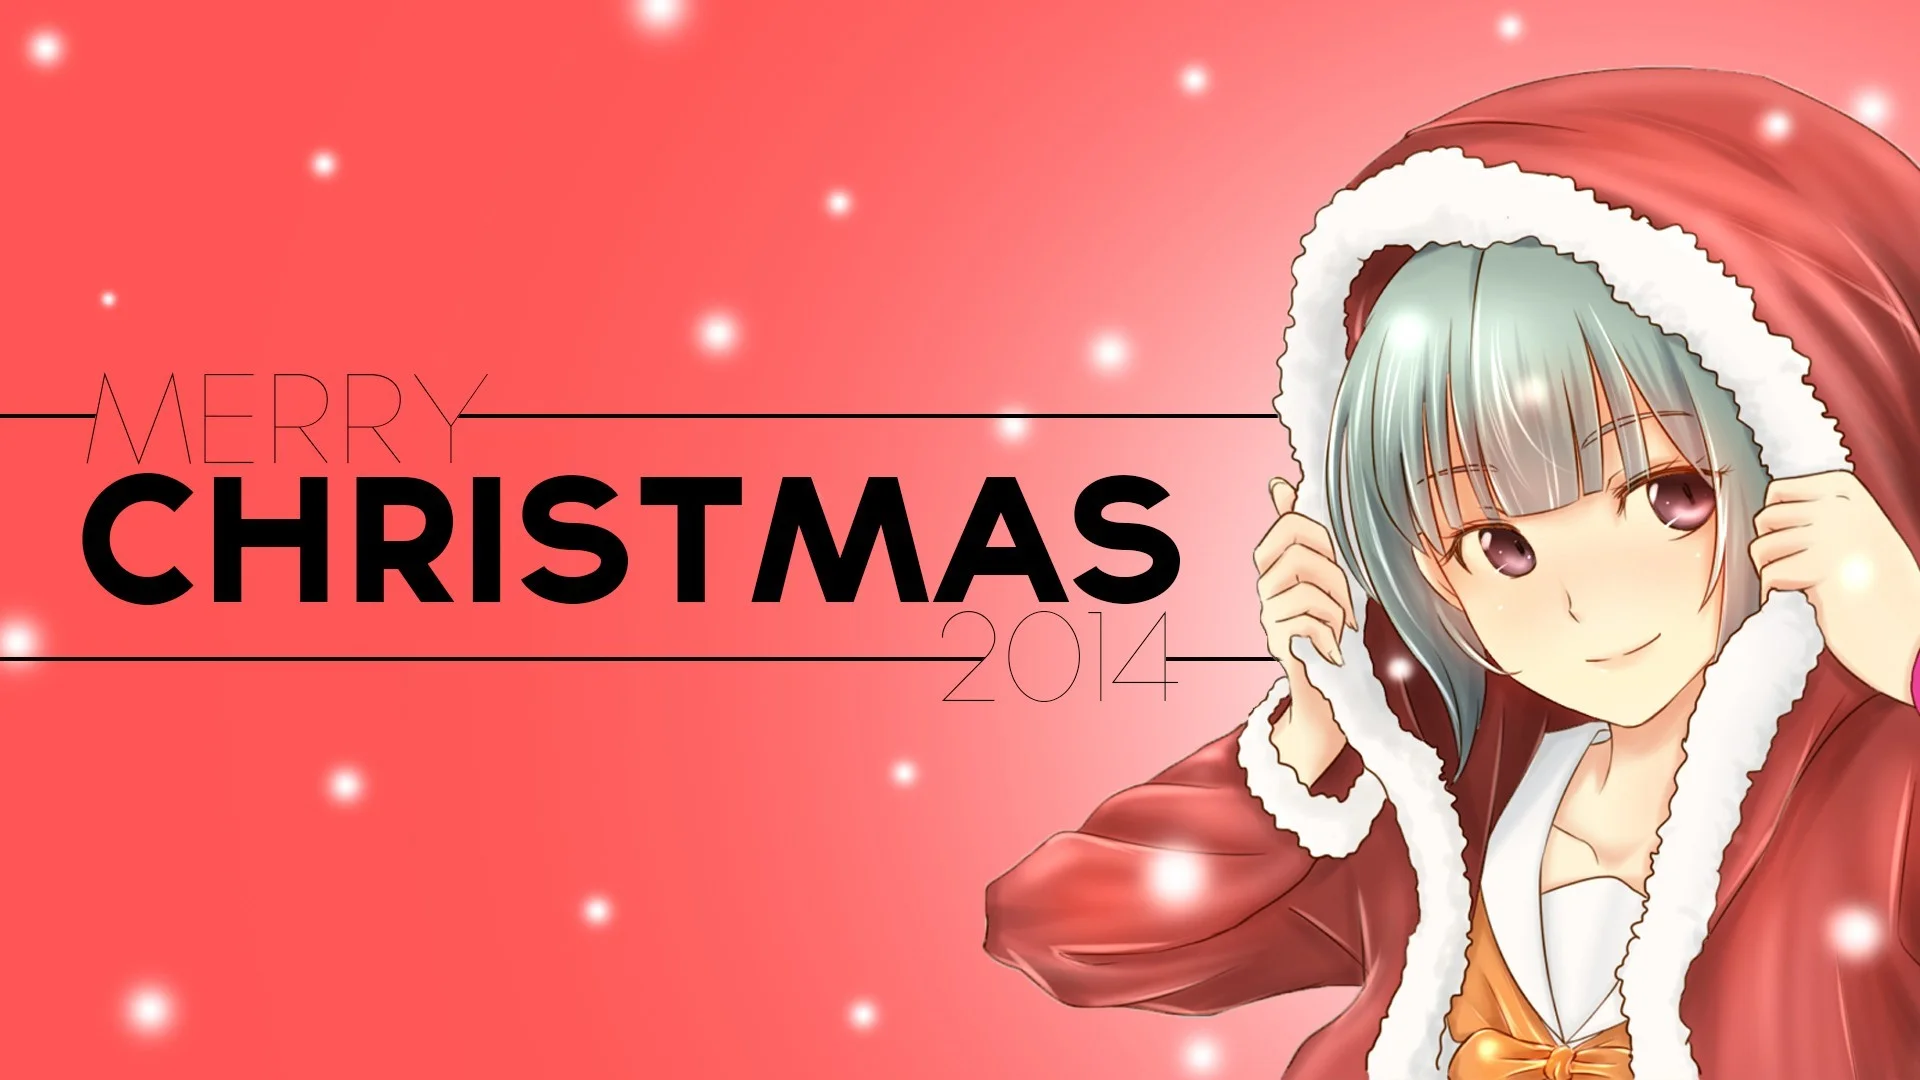 6355 Christmas Anime Images Stock Photos  Vectors  Shutterstock